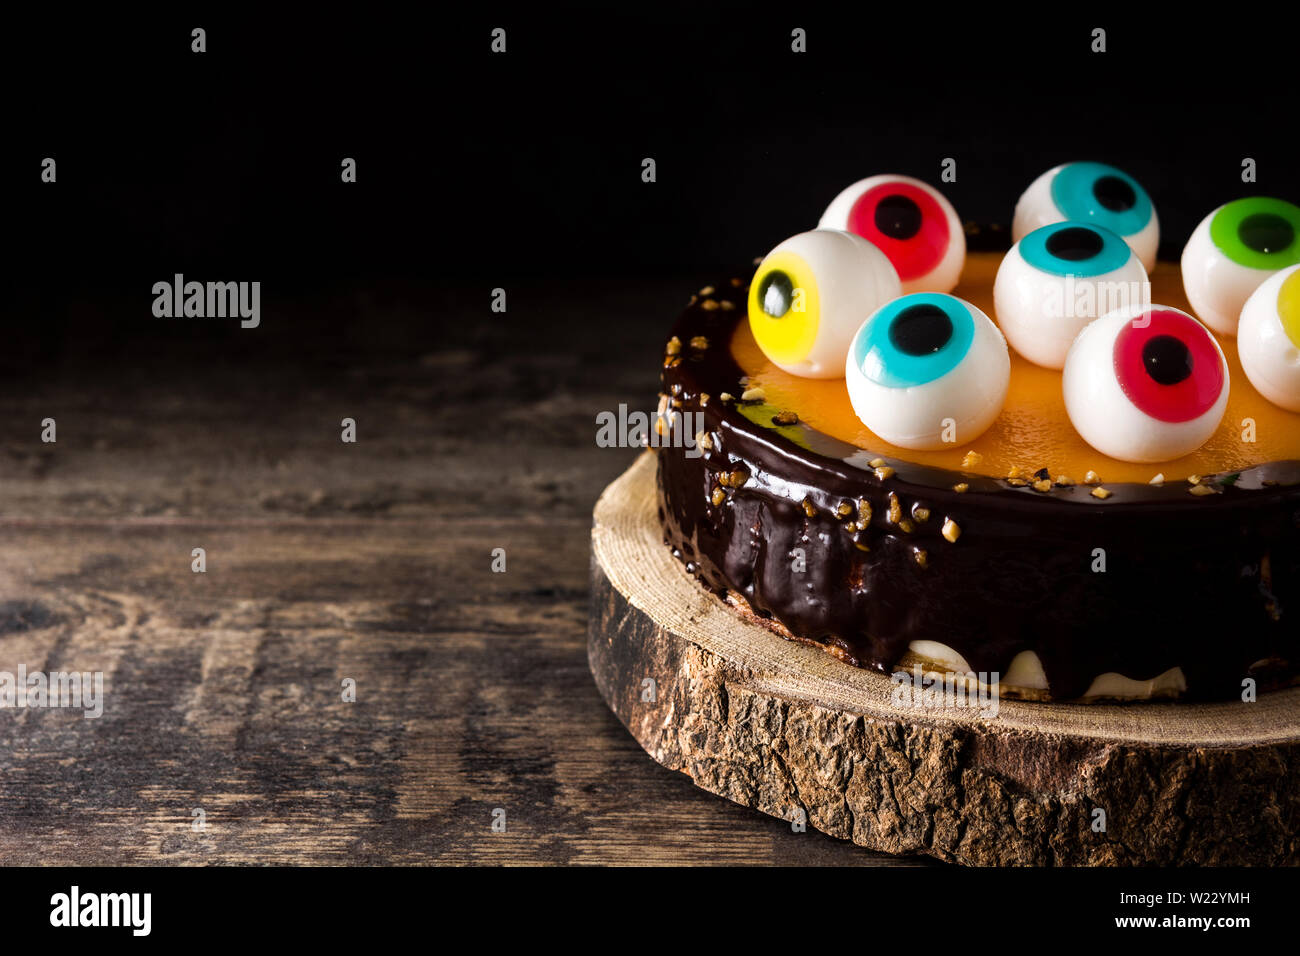 Halloween cake with candy eyes decoration on wooden table and ...